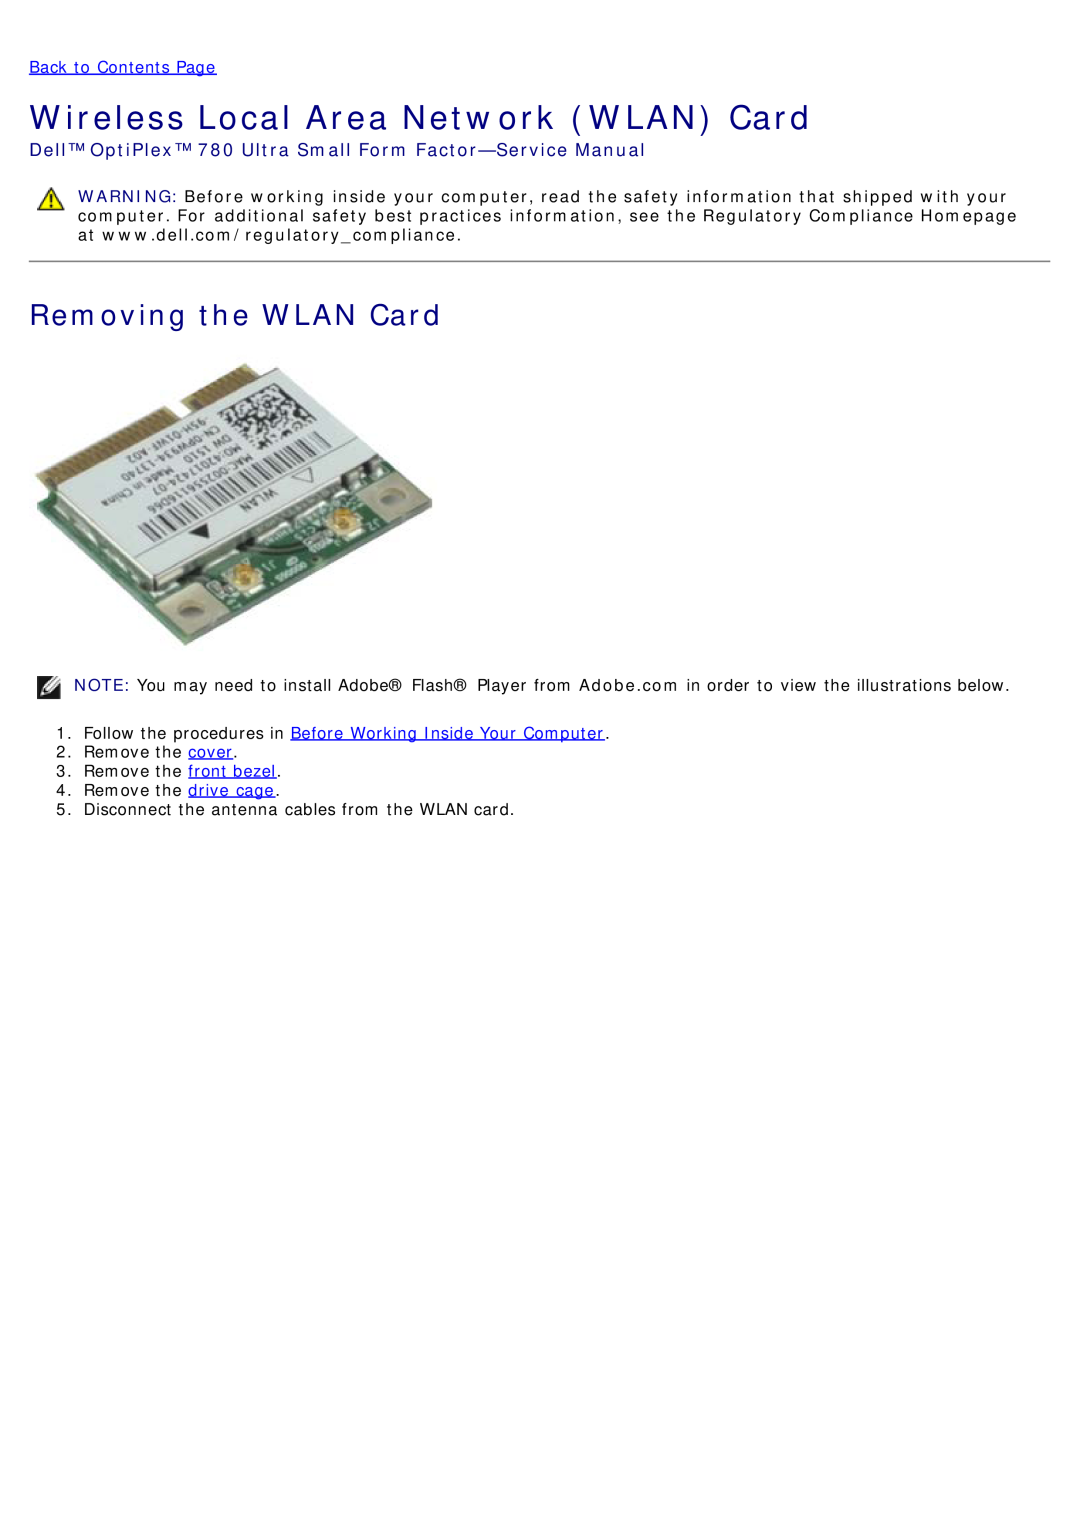 Dell 780 service manual Wireless Local Area Network WLAN Card, Removing the WLAN Card, Back to Contents Page 